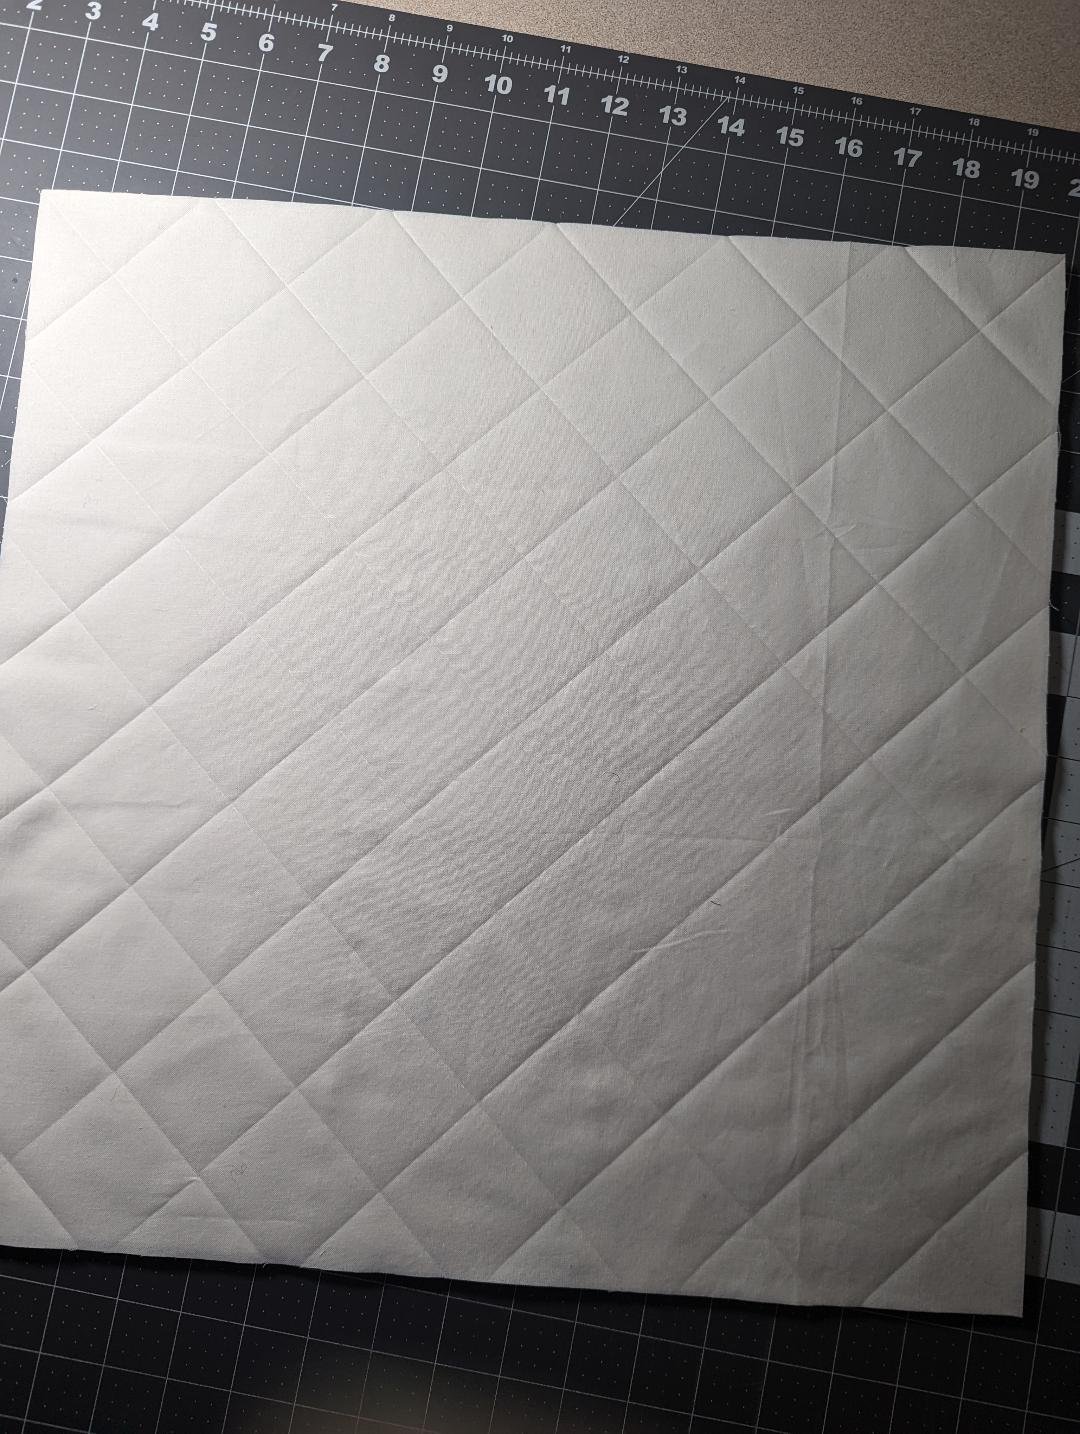 Hera marker demo for marking straight line quilting designs. This is my  FAVORITE tool for marking straight line quilting lines. So easy to use  and, By My Very Own Quilt Shop